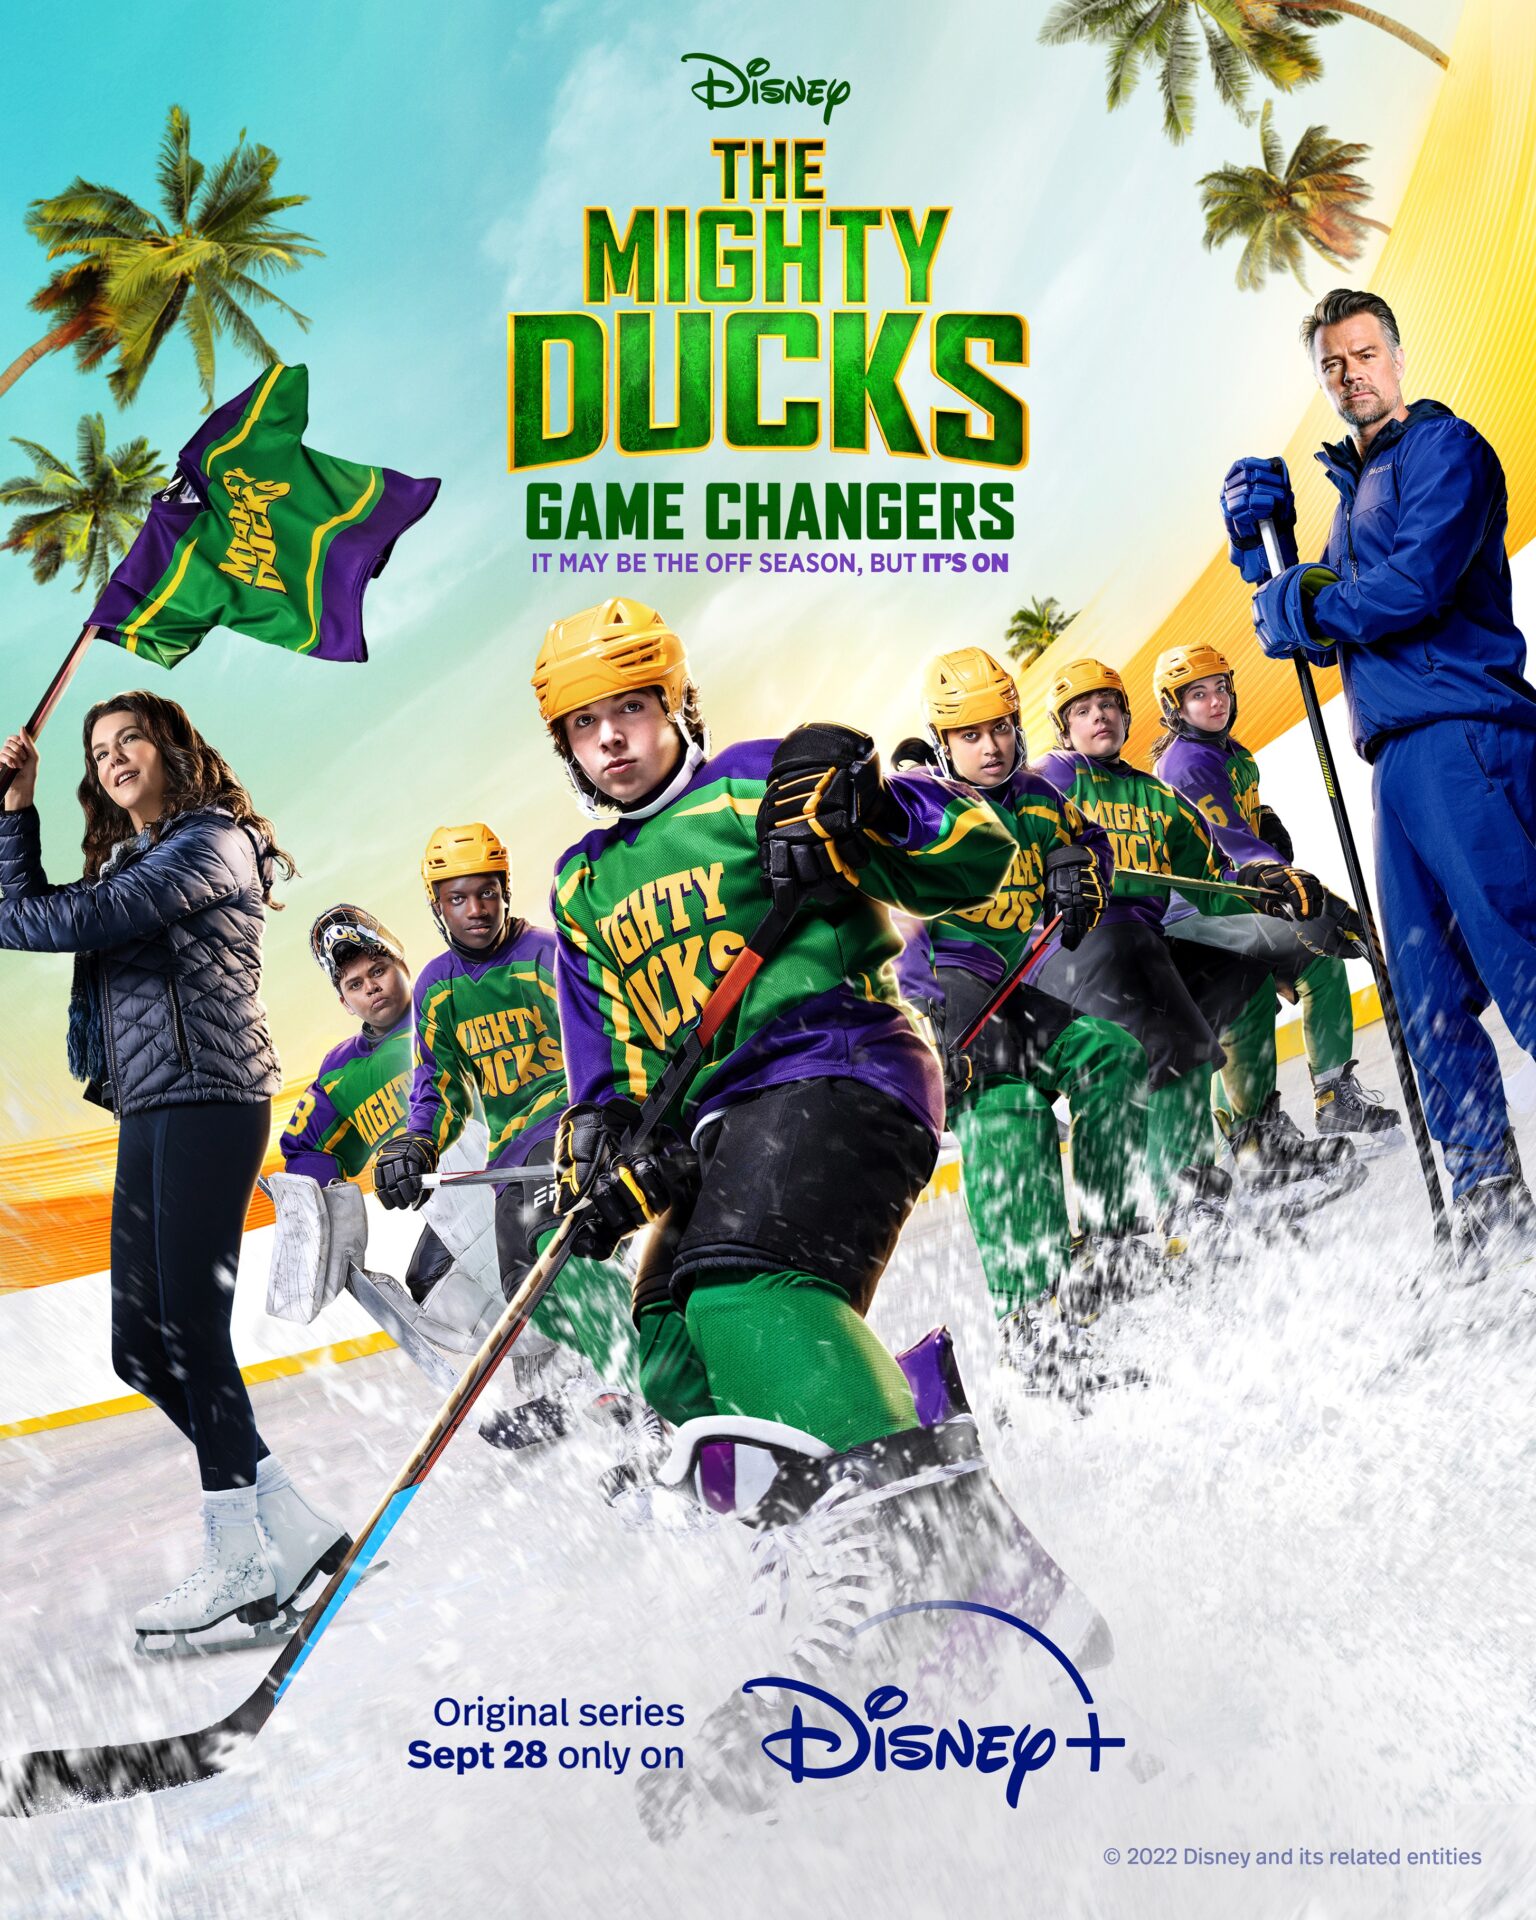 Mighty Ducks: Game Changers Season 2 Clip Shows Jace Faking the Glitch